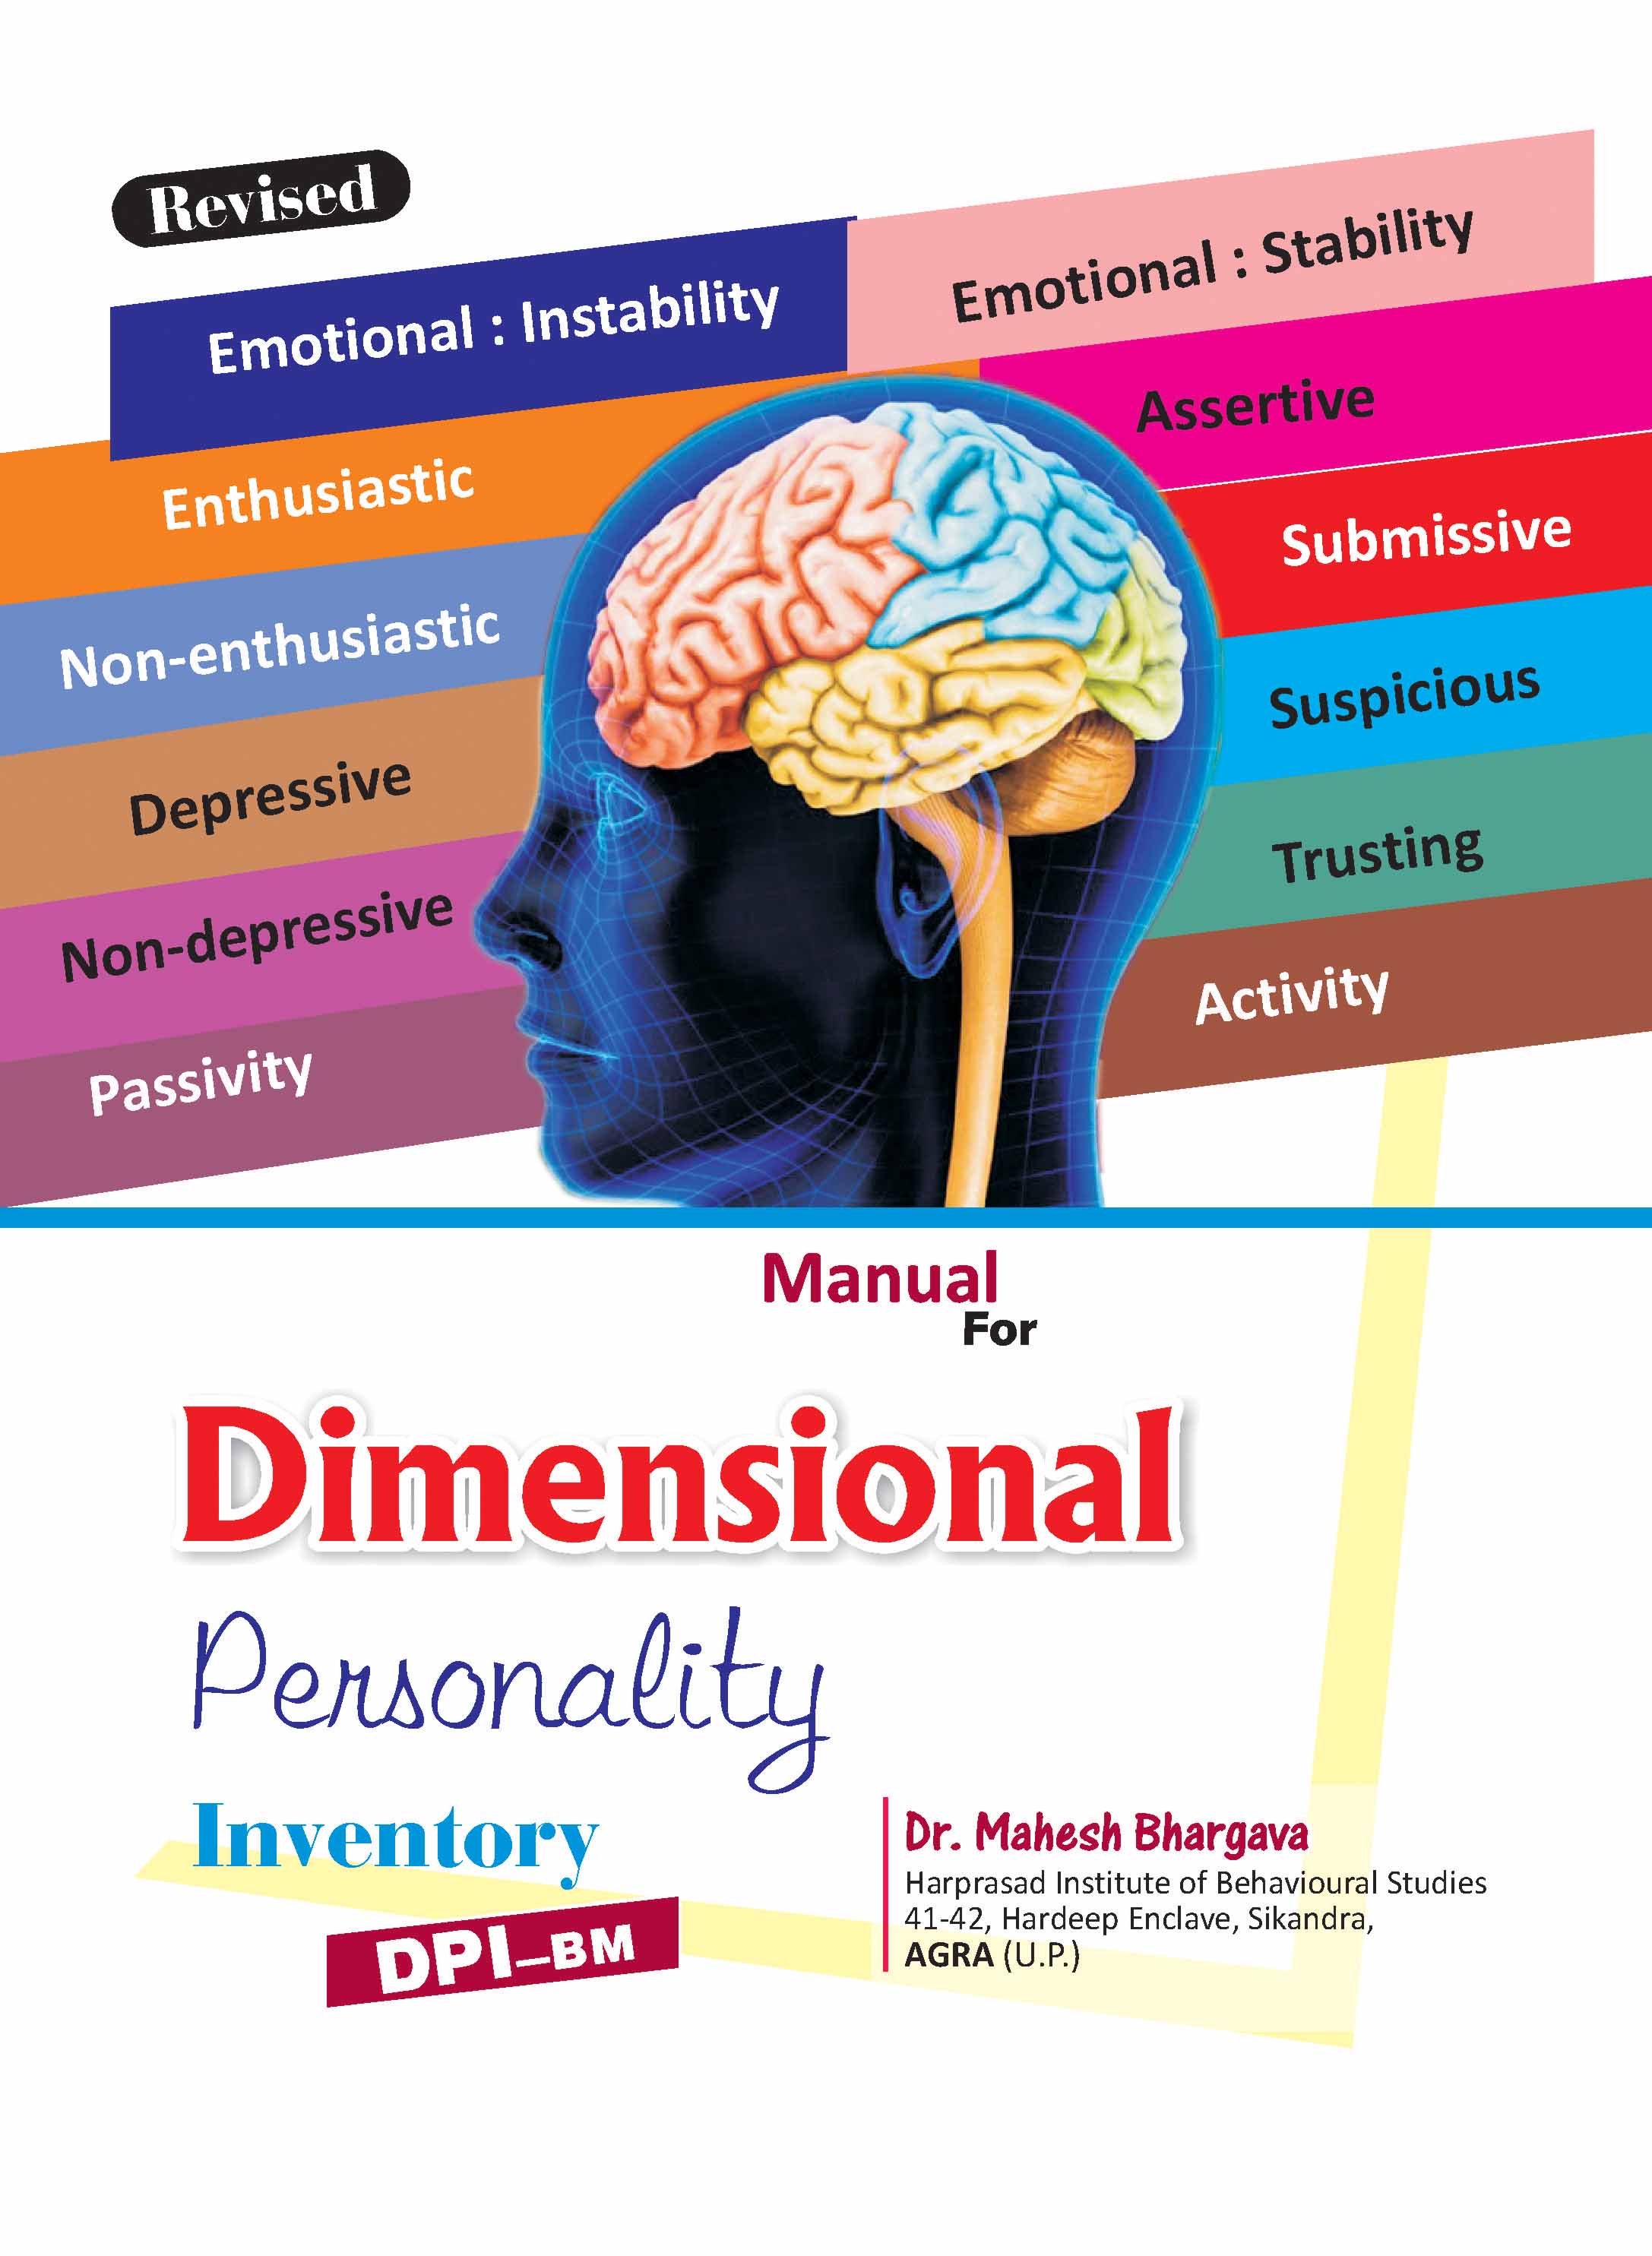 DIMENSIONAL-PERSONALITY-INVENTORY